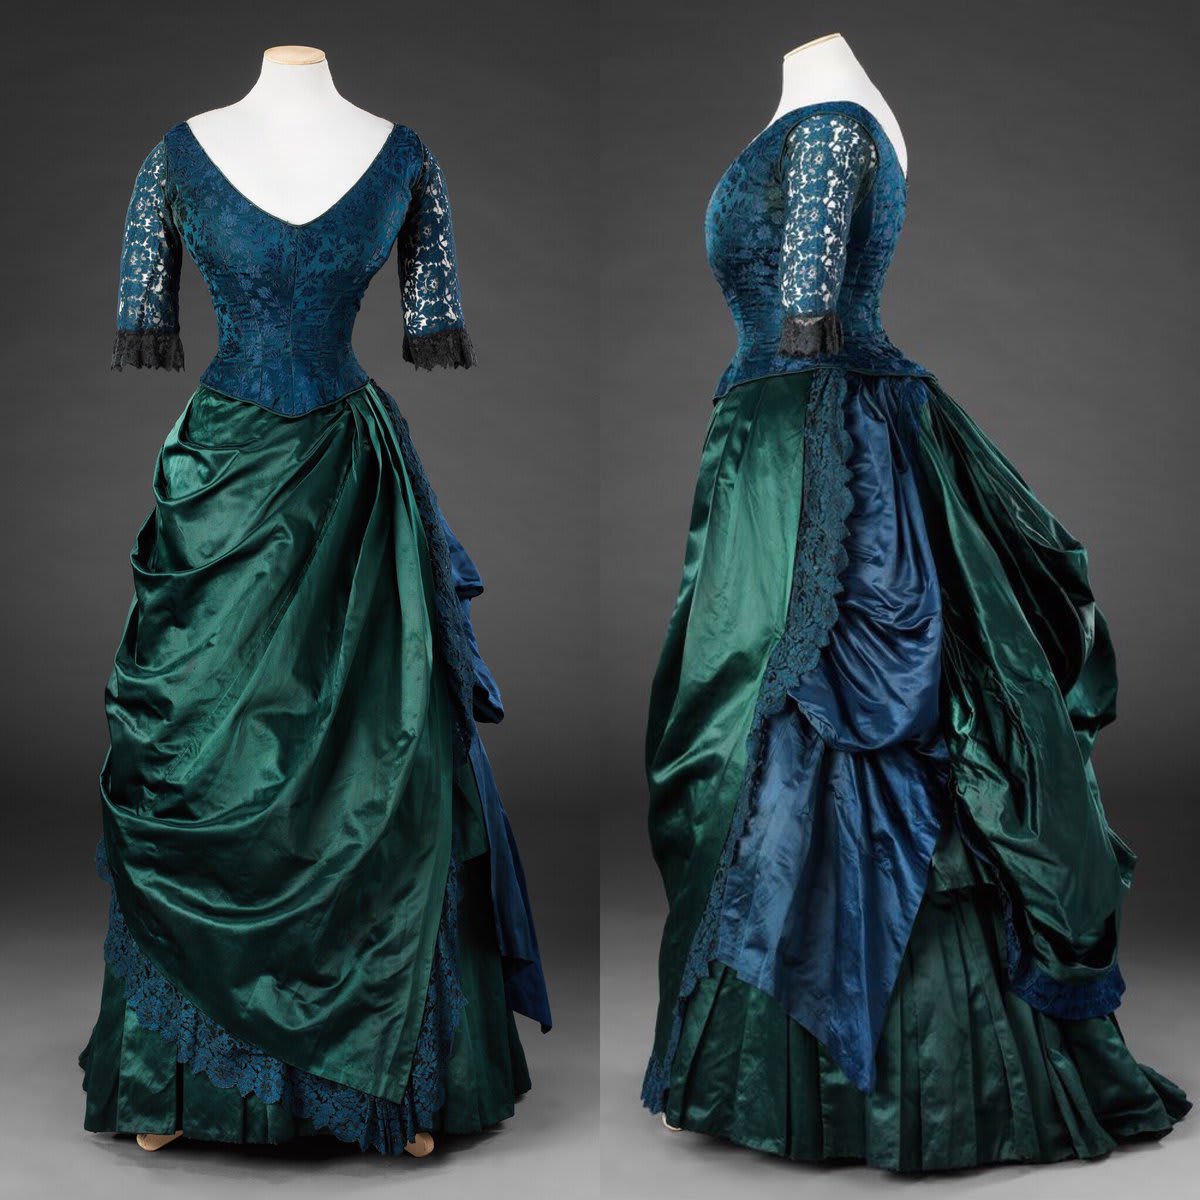 This dress. I love this dress. The rich jewel tones are just perfect. Mid 1880s, via John Bright Collection.